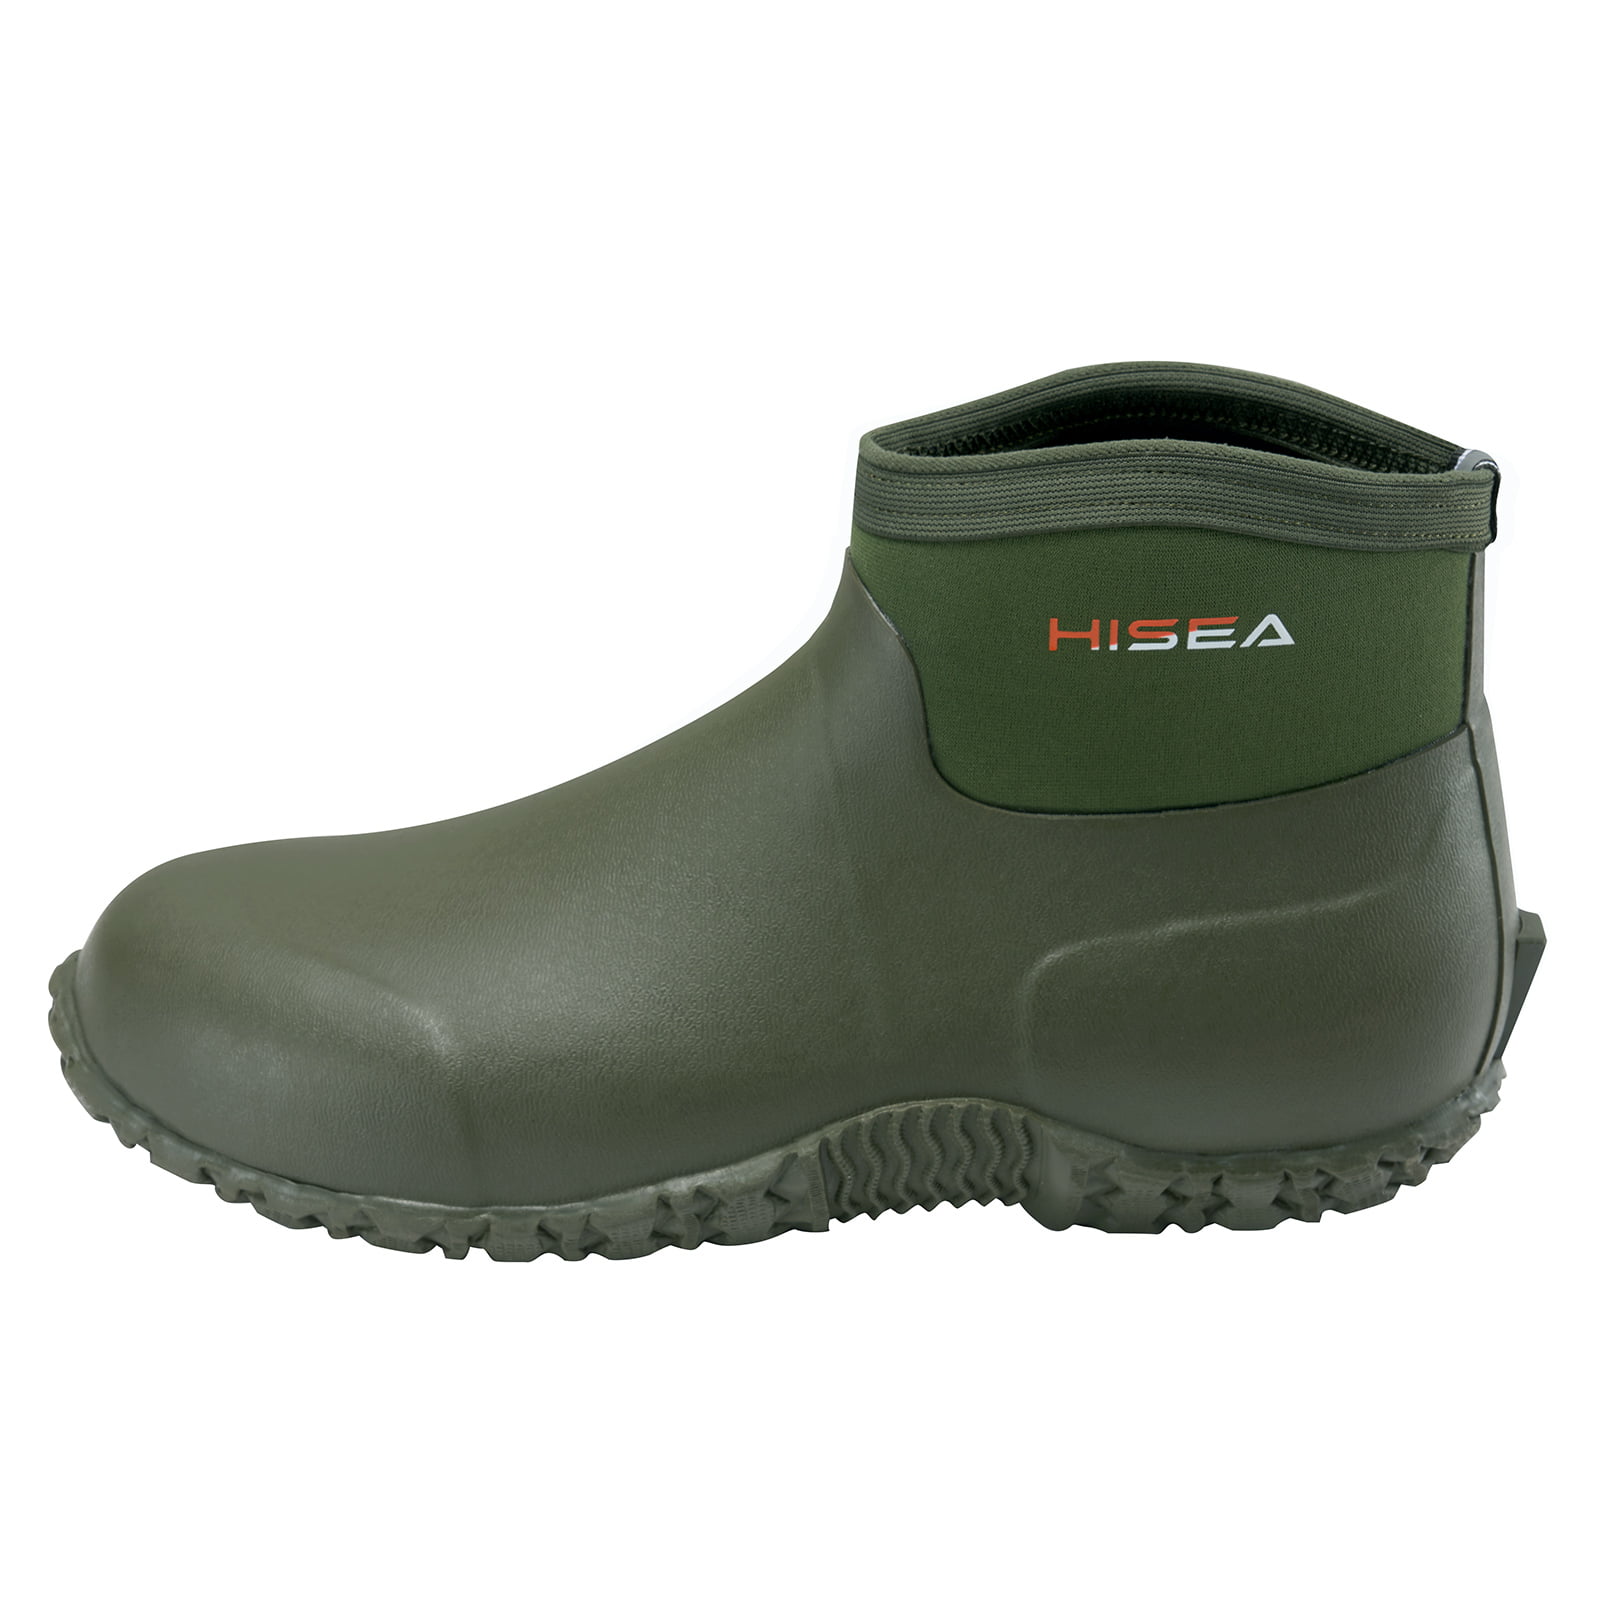 HISEA Men's Rain Shoes Ankle Height Rubber Garden Boots Insulated ...